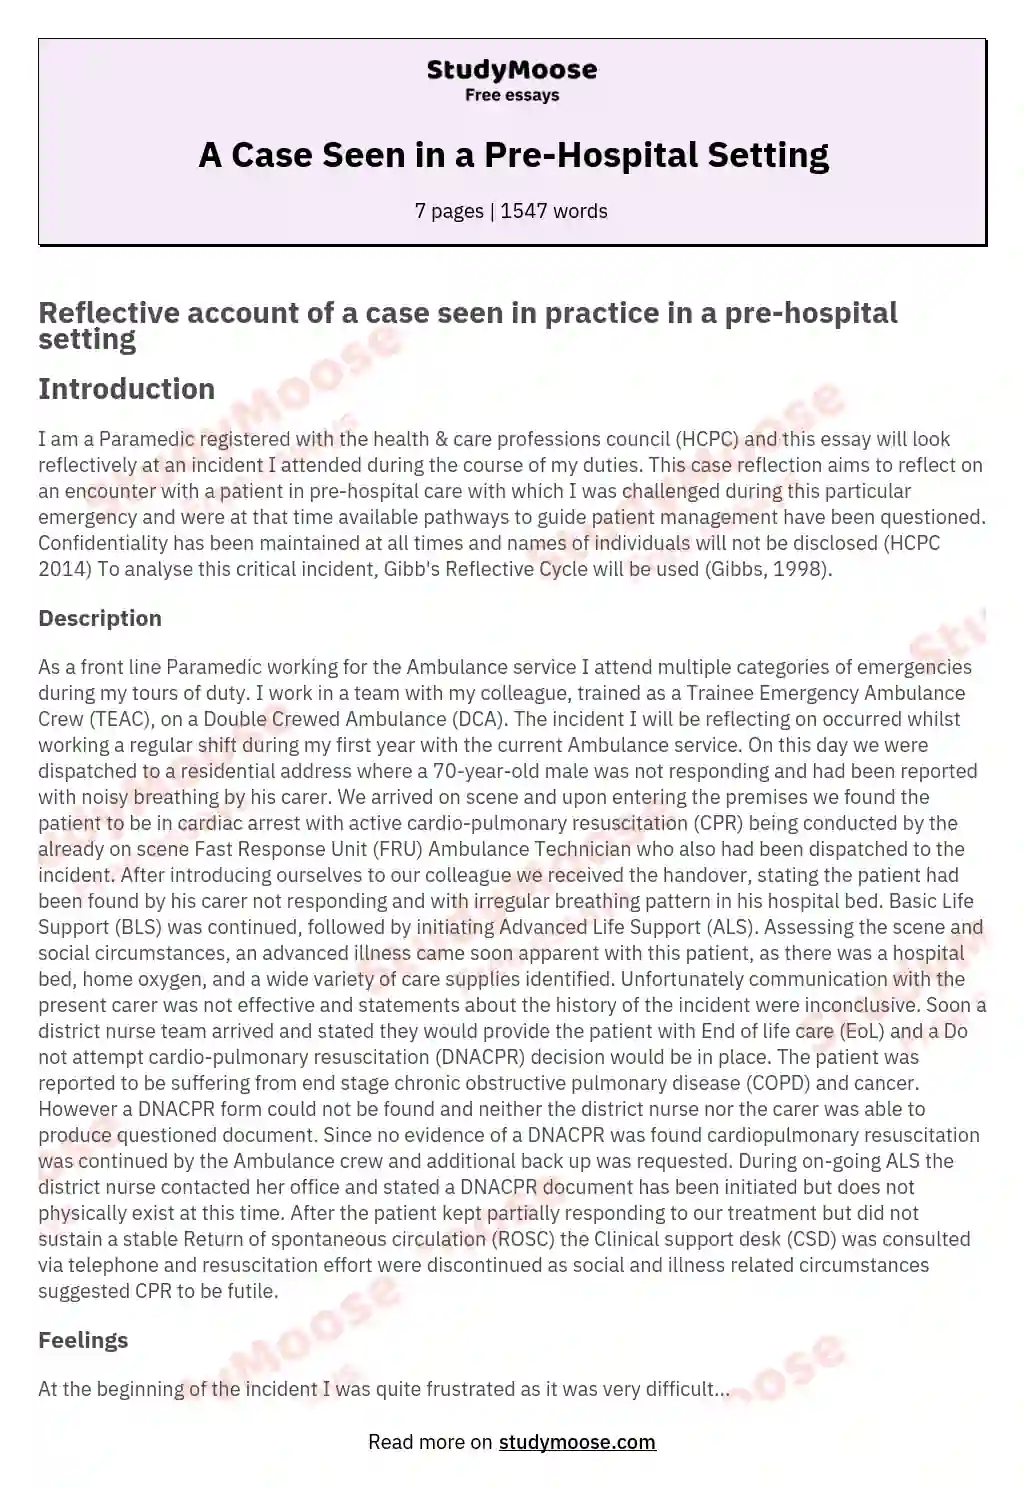 A Case Seen in a Pre-Hospital Setting essay